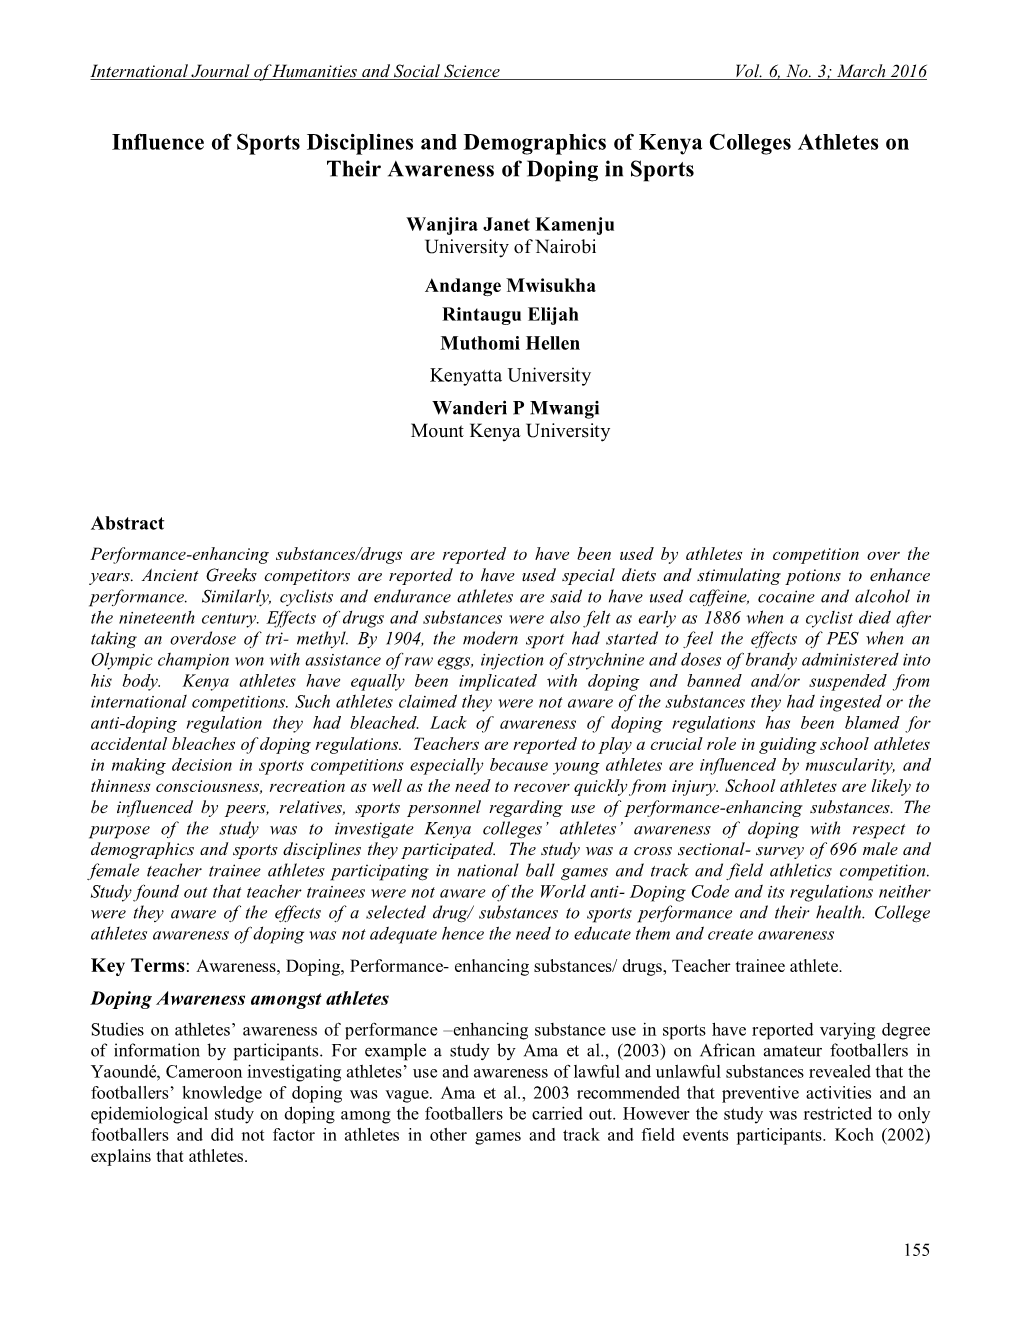 Influence of Sports Disciplines and Demographics of Kenya Colleges Athletes on Their Awareness of Doping in Sports